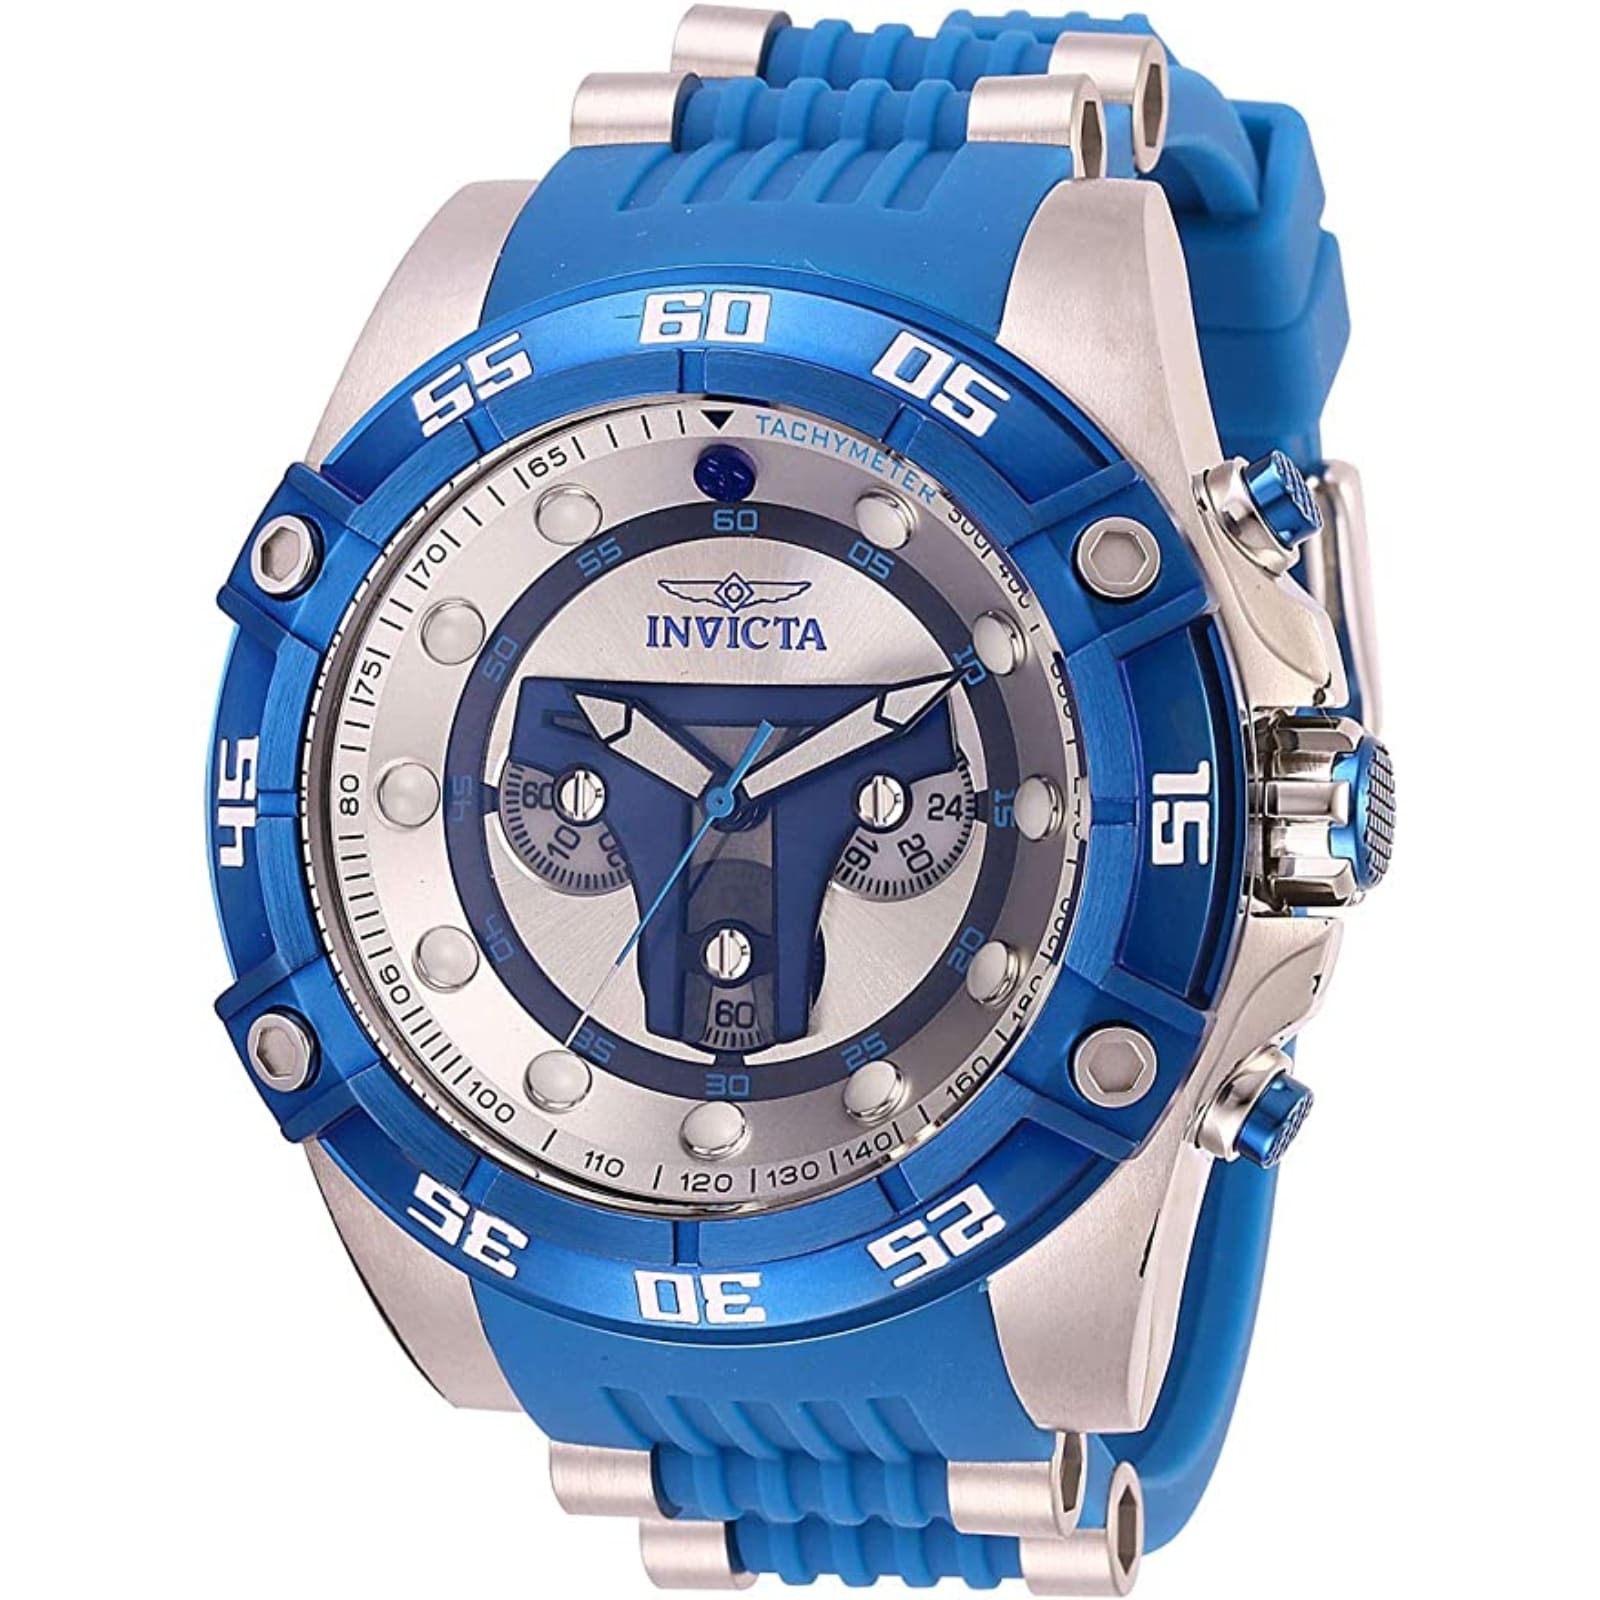 Star Wars Men's Stainless Steel Quartz Watch with Silicone Strap, Blue, 26 (Model: 27966)